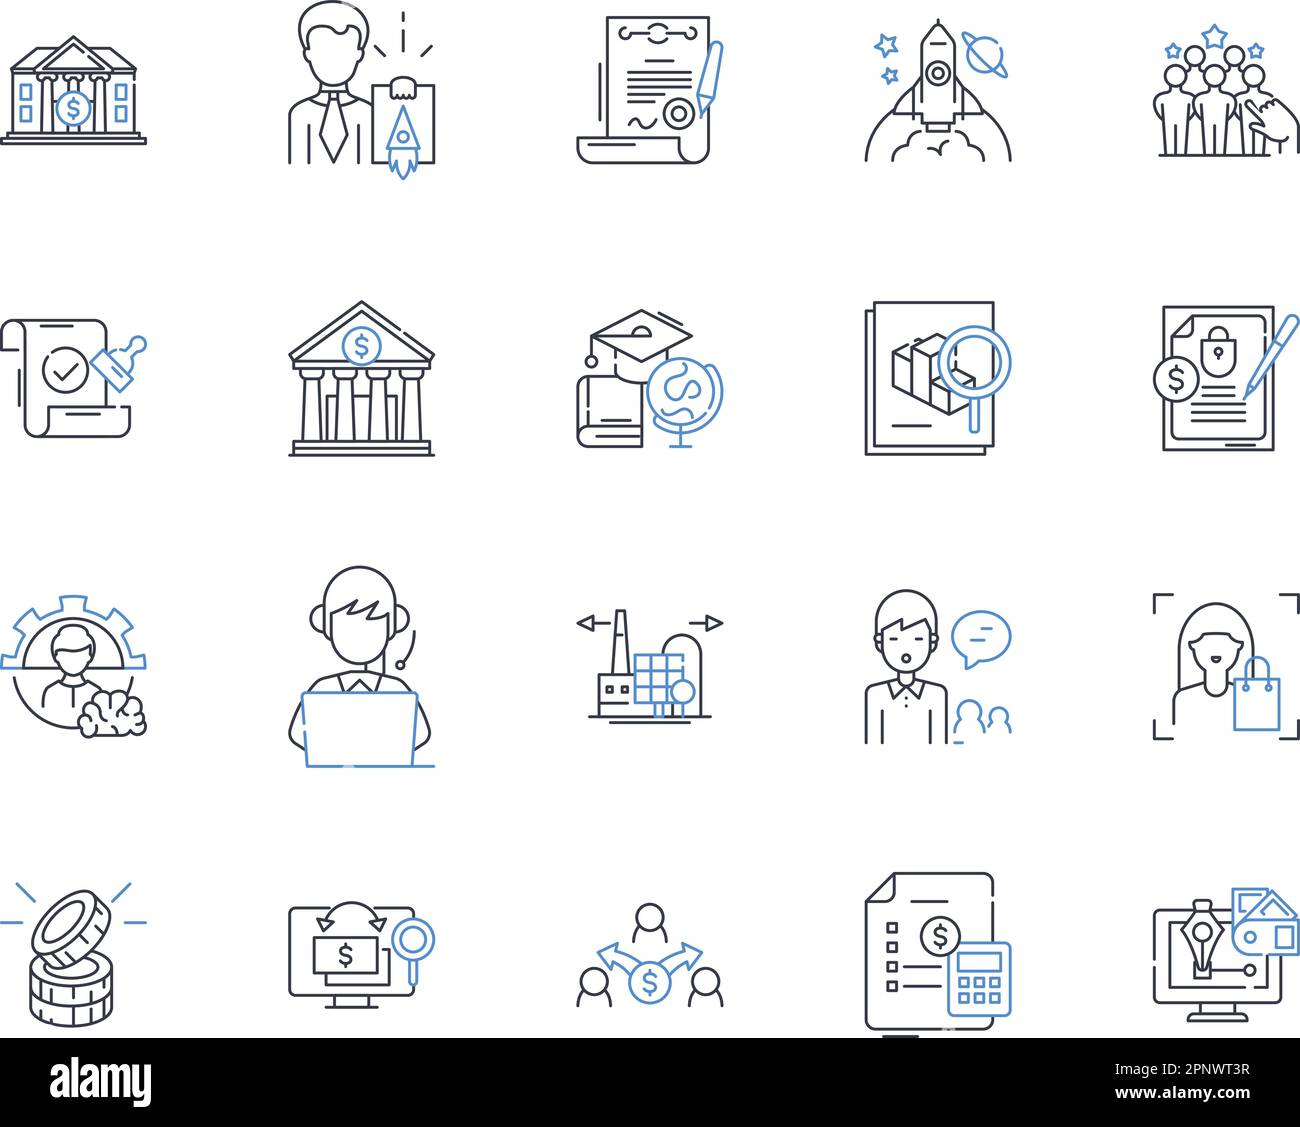 Marketing Automation line icons collection. Lead Generation, Email Marketing, Customer Segmentation, Drip Campaigns, Analytics, Automated Emails, CRM Stock Vector